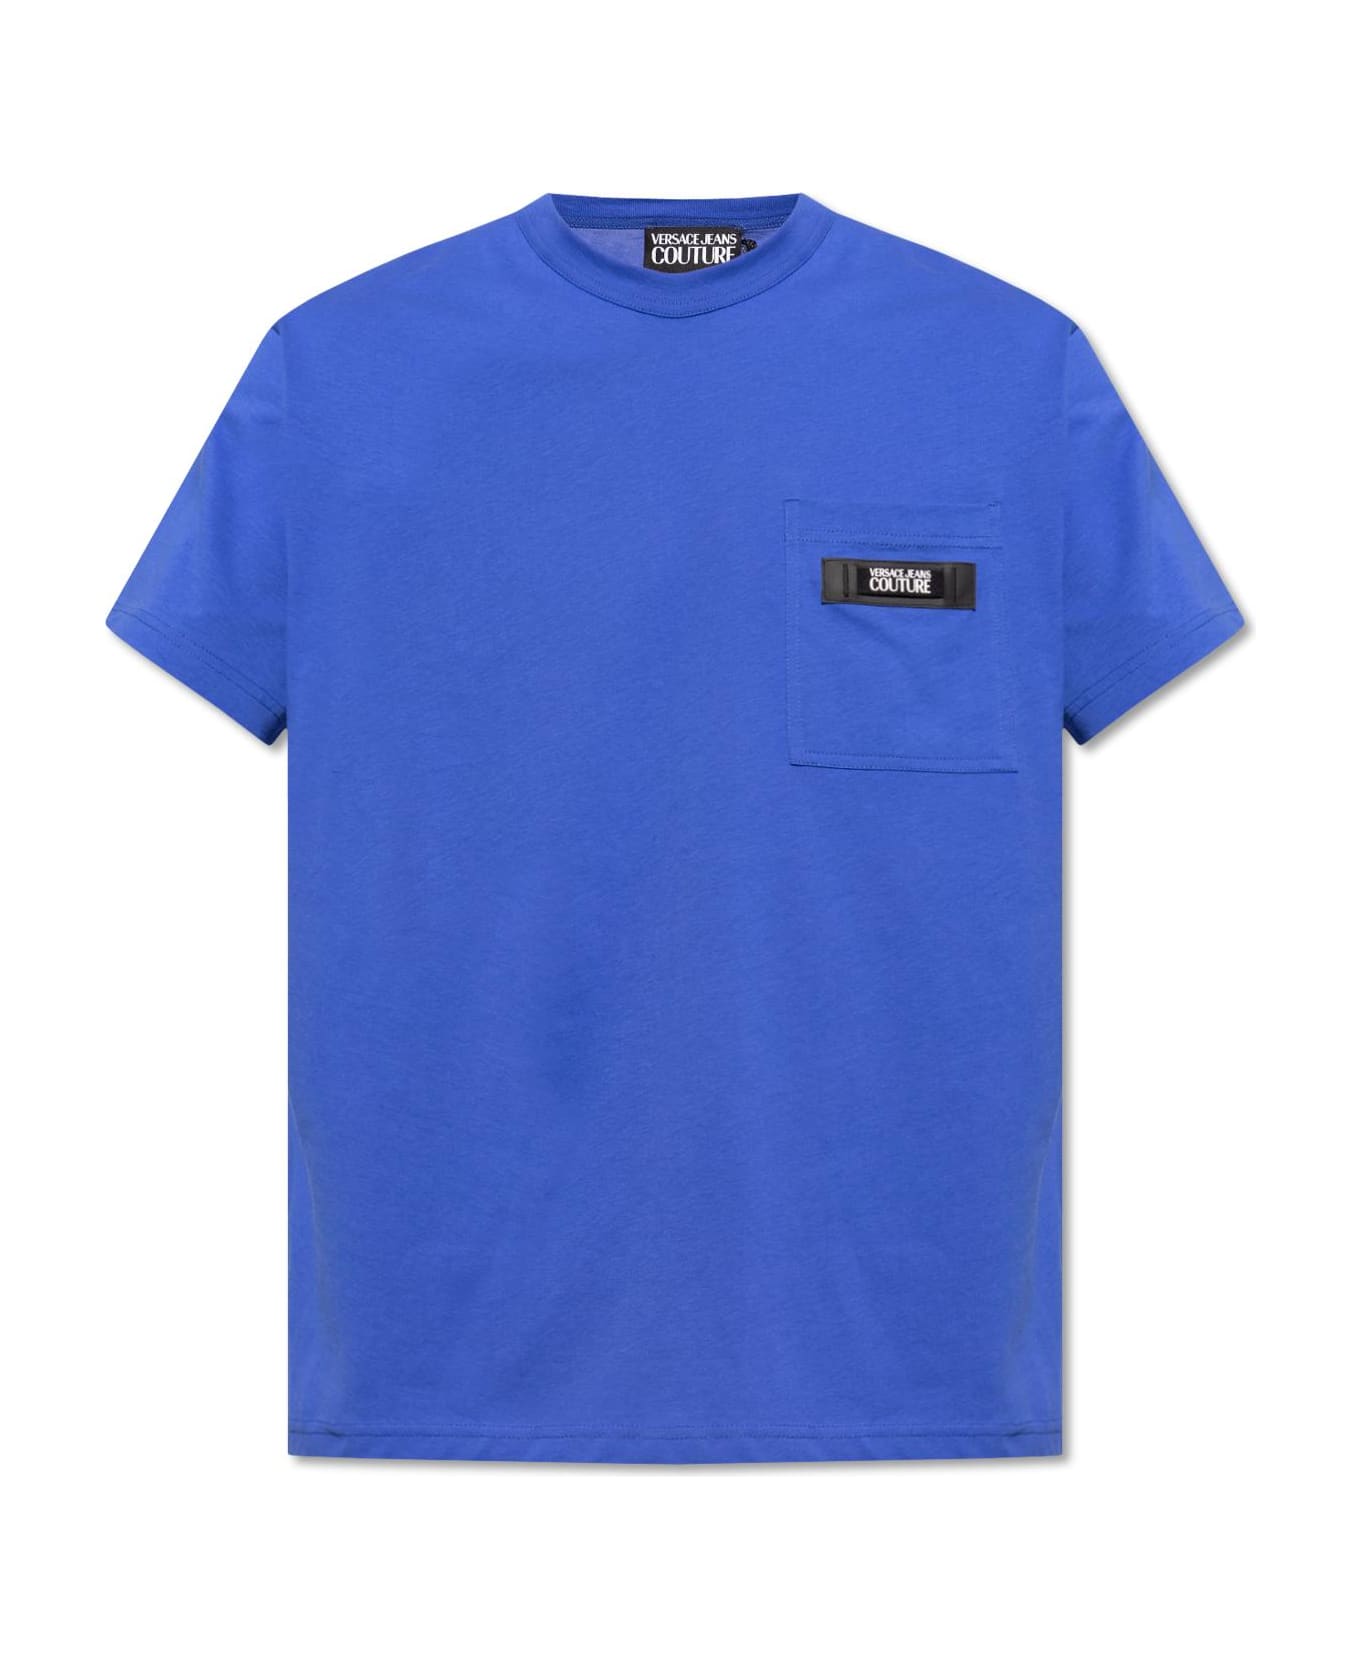 Versace Jeans Couture T-shirt With Pocket - Blu シャツ